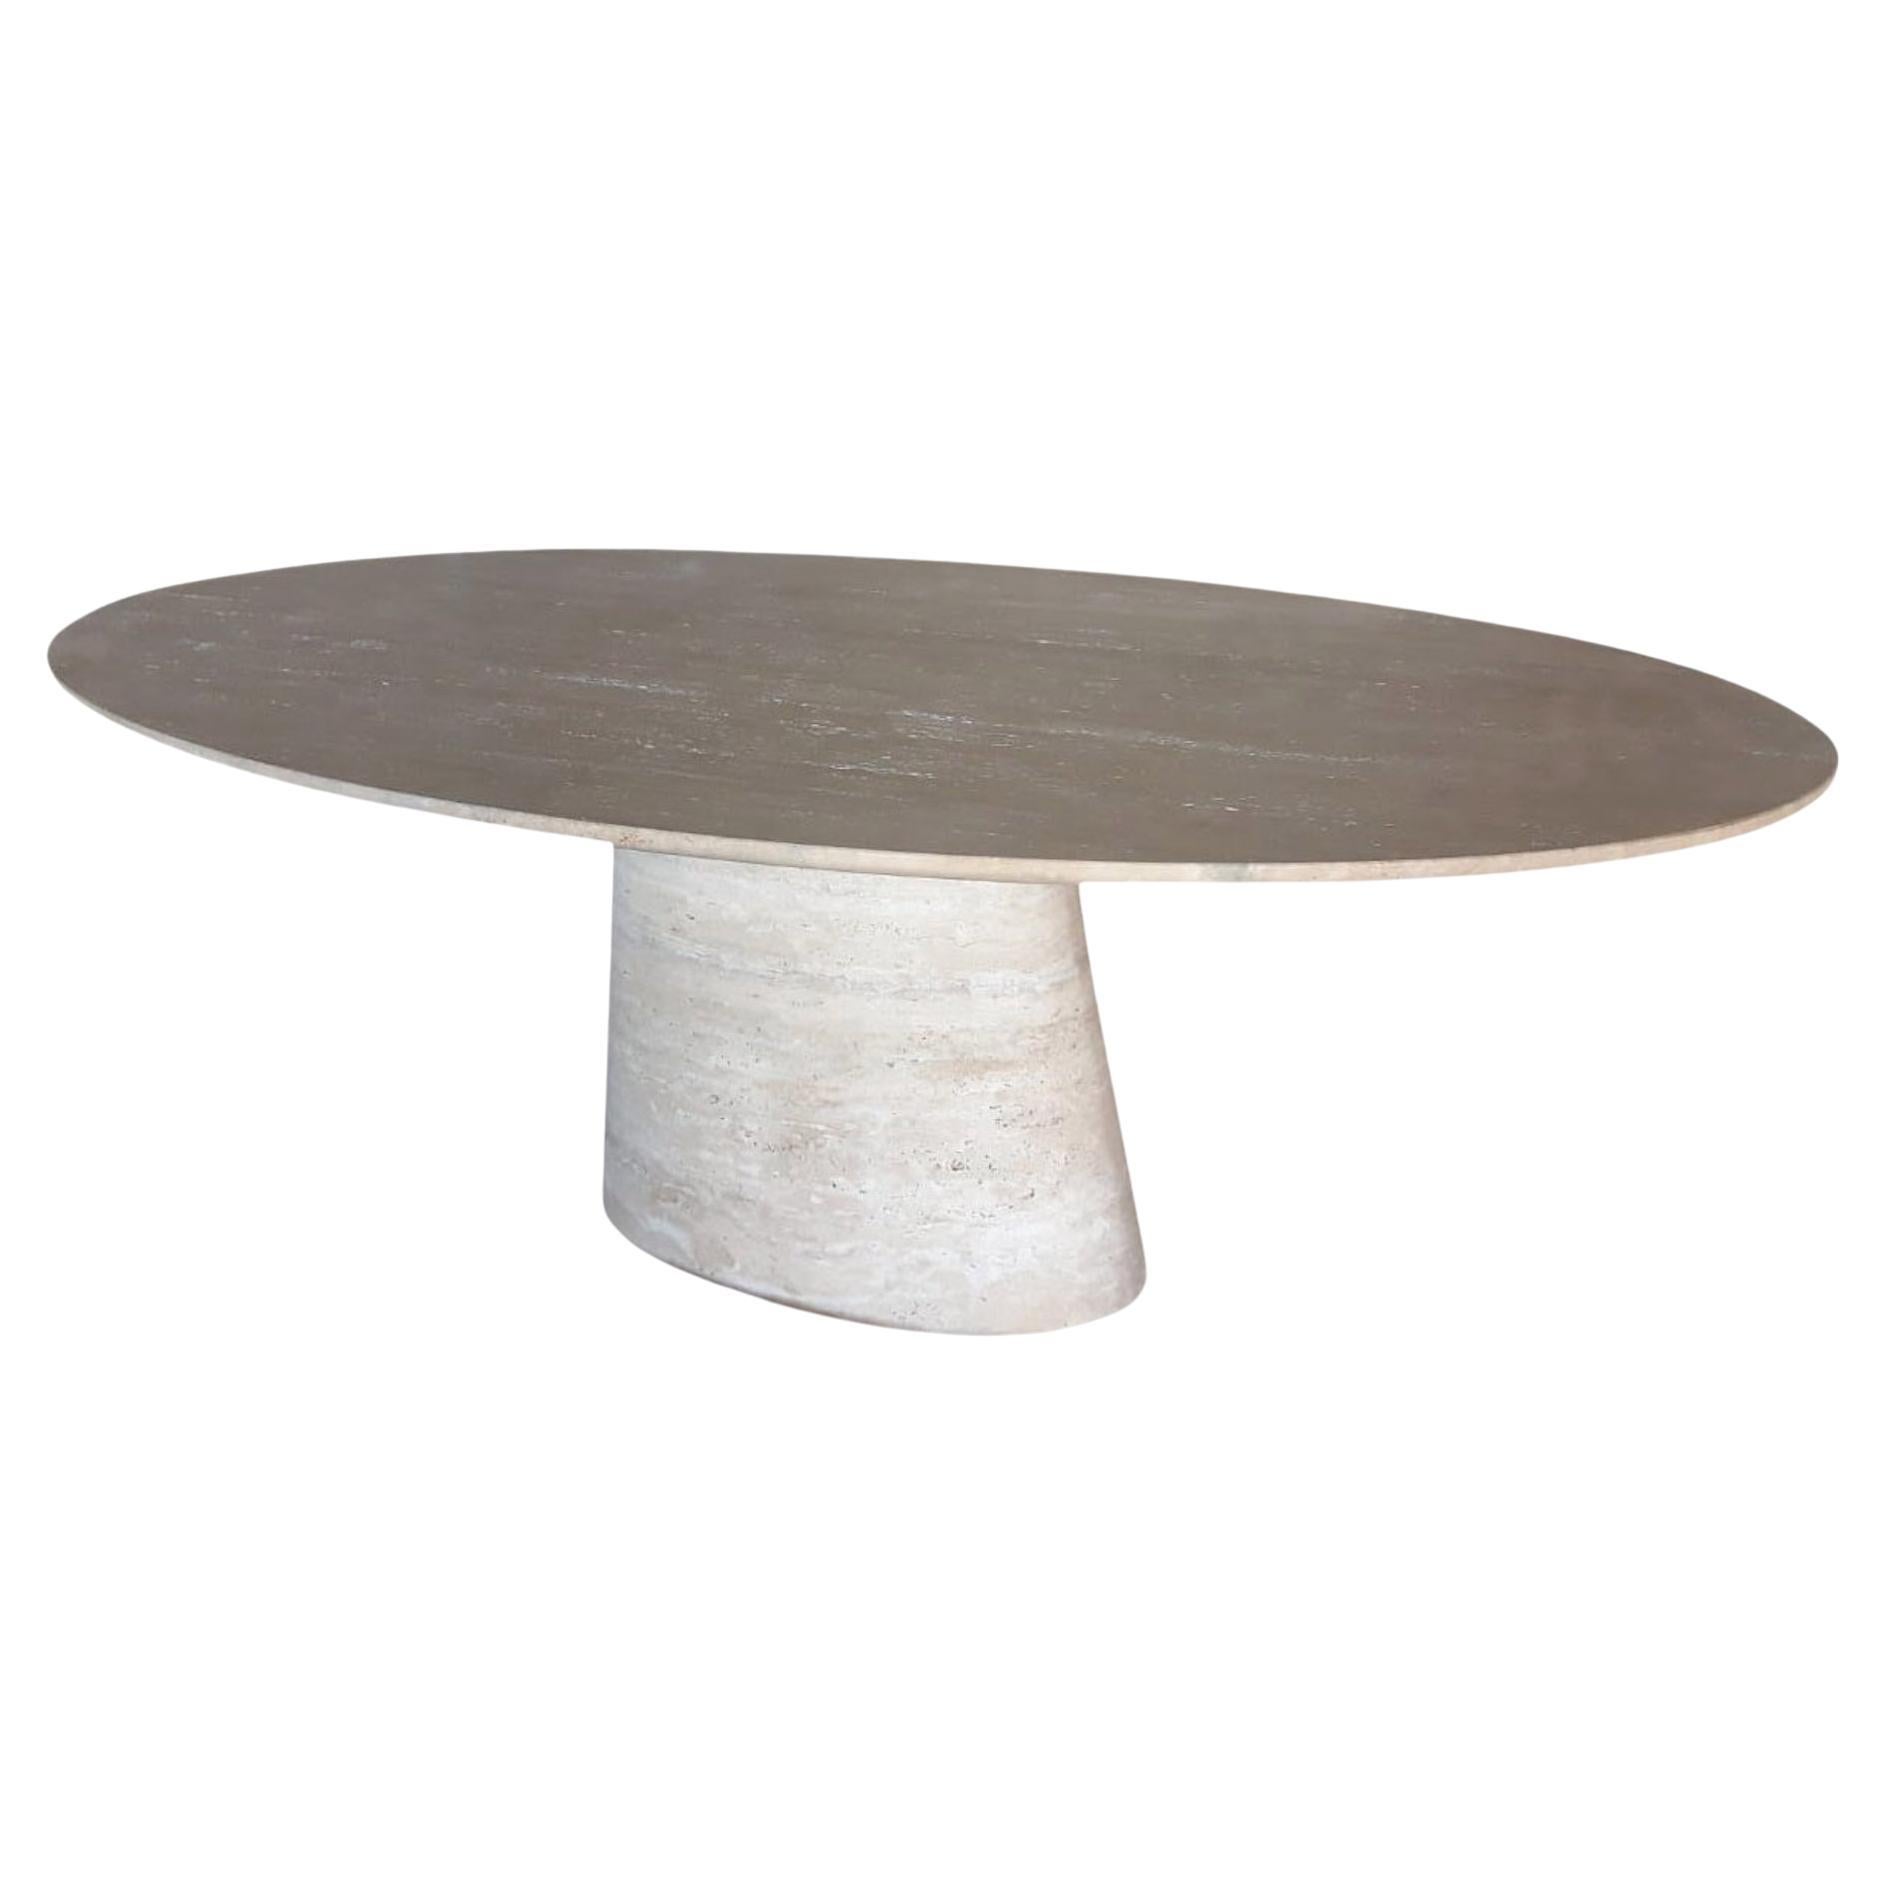 Made To Order Italian Travertine Dining Table Customizable For Sale